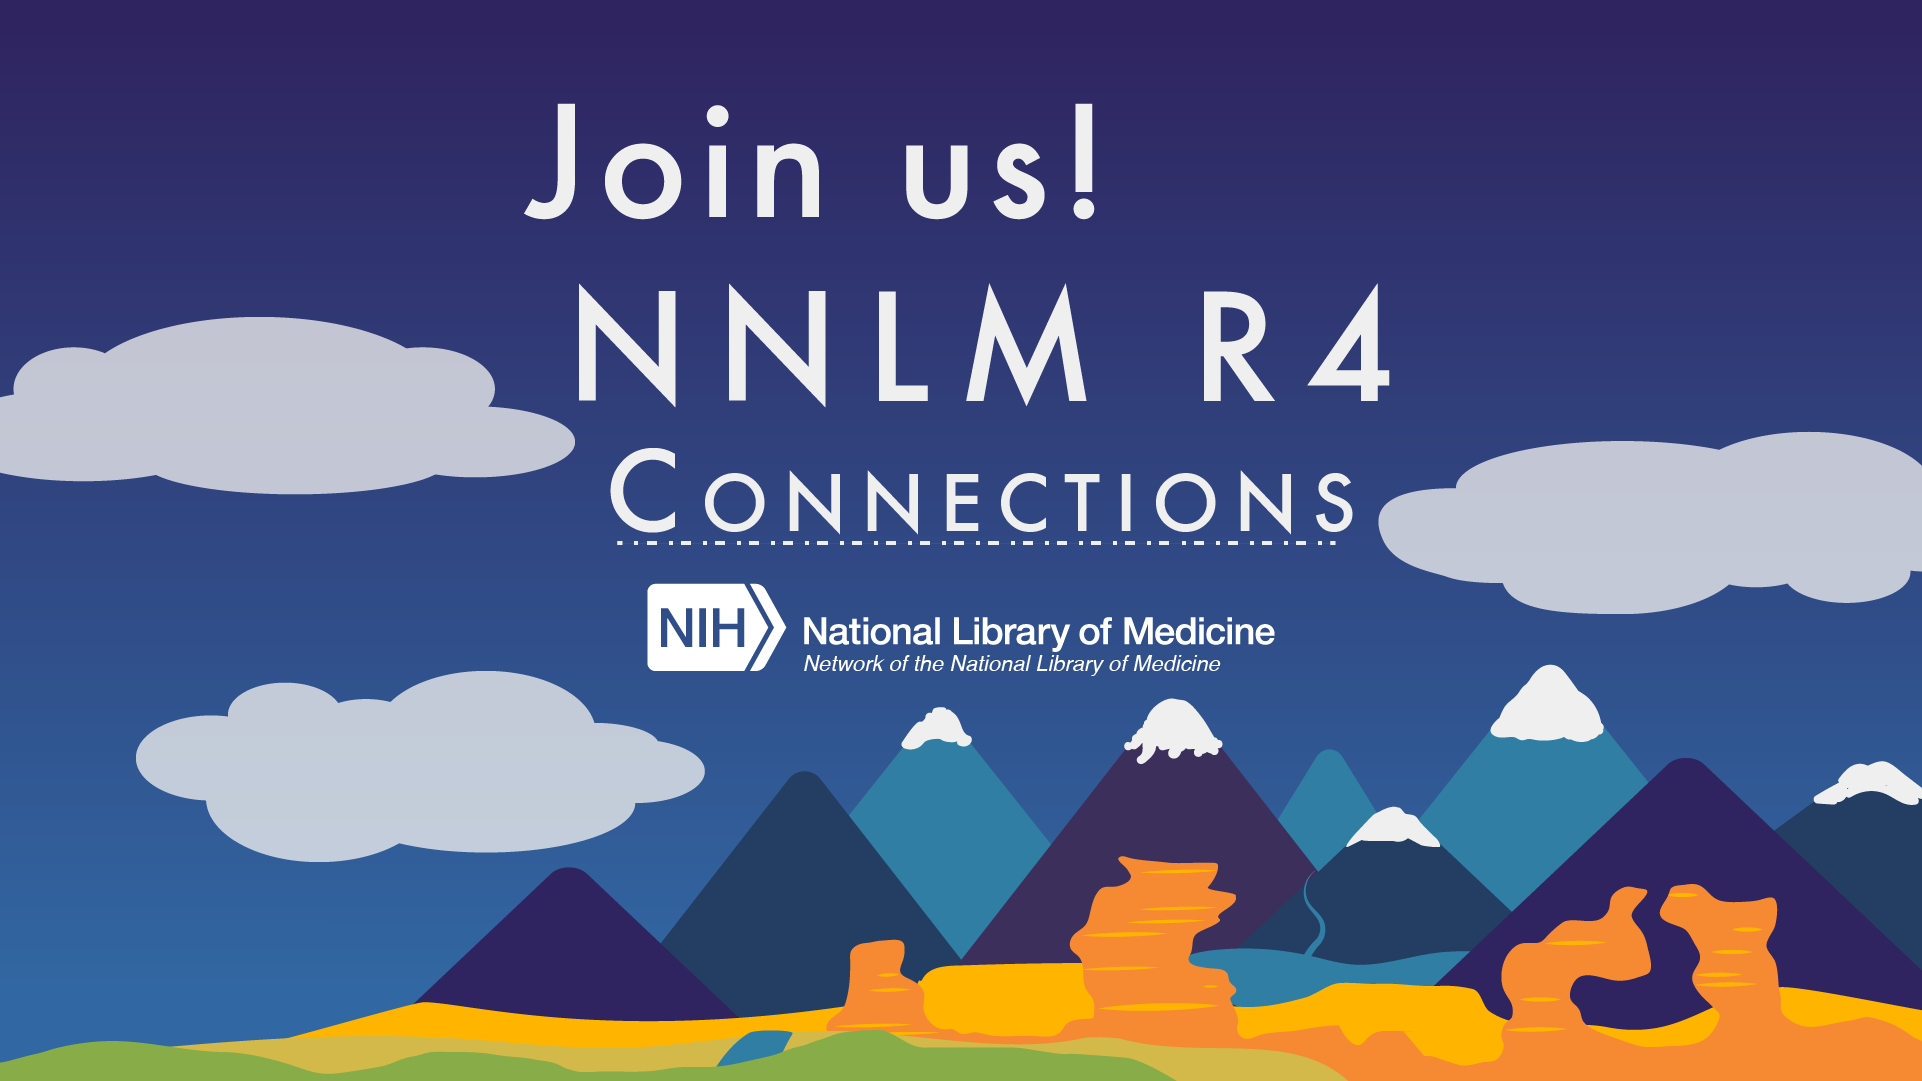 Join Us! NNLM R4 Connections